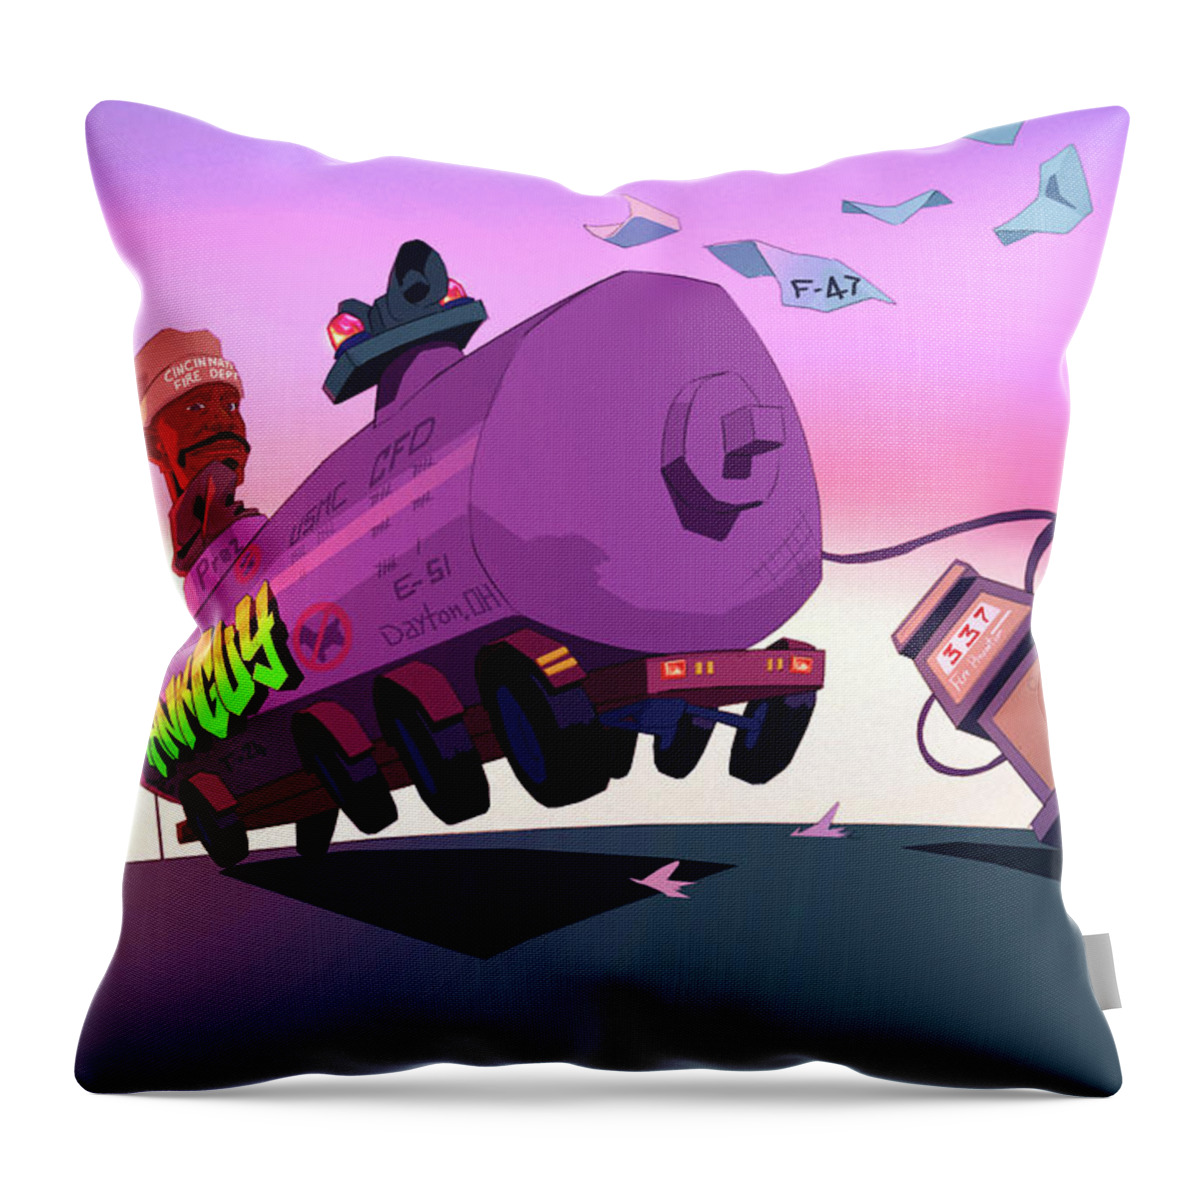  Throw Pillow featuring the digital art Retirement Flyer by Al Harden